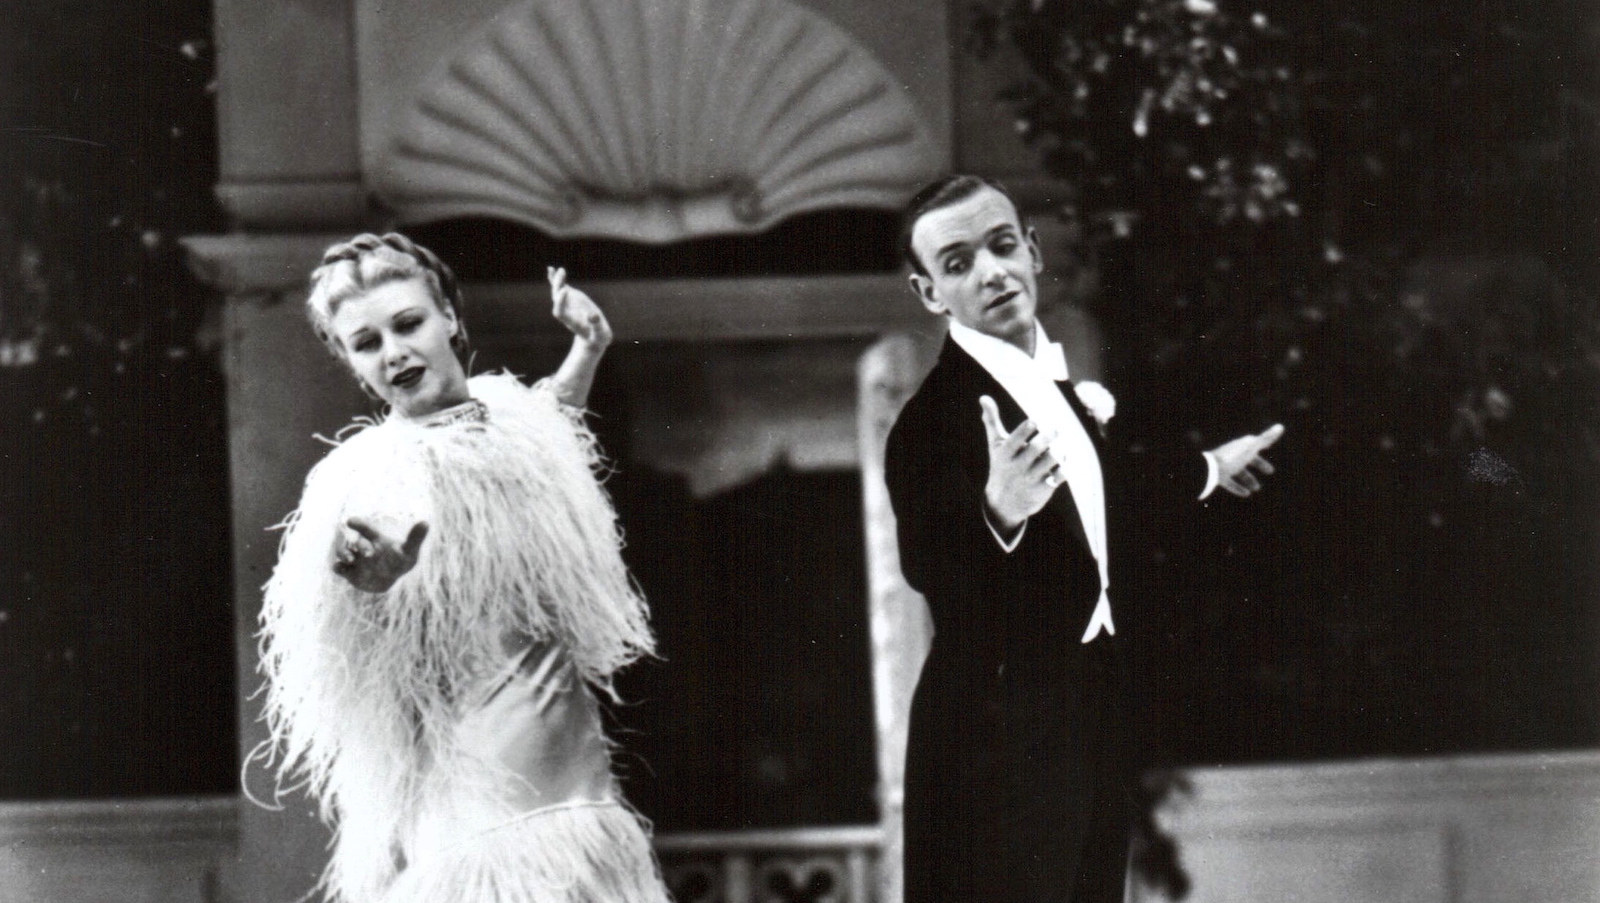 In a black and white photo a man in a tuxedo and a woman in a fluttering feathery dress dance side by side facing the camera, each with an arm outstretched